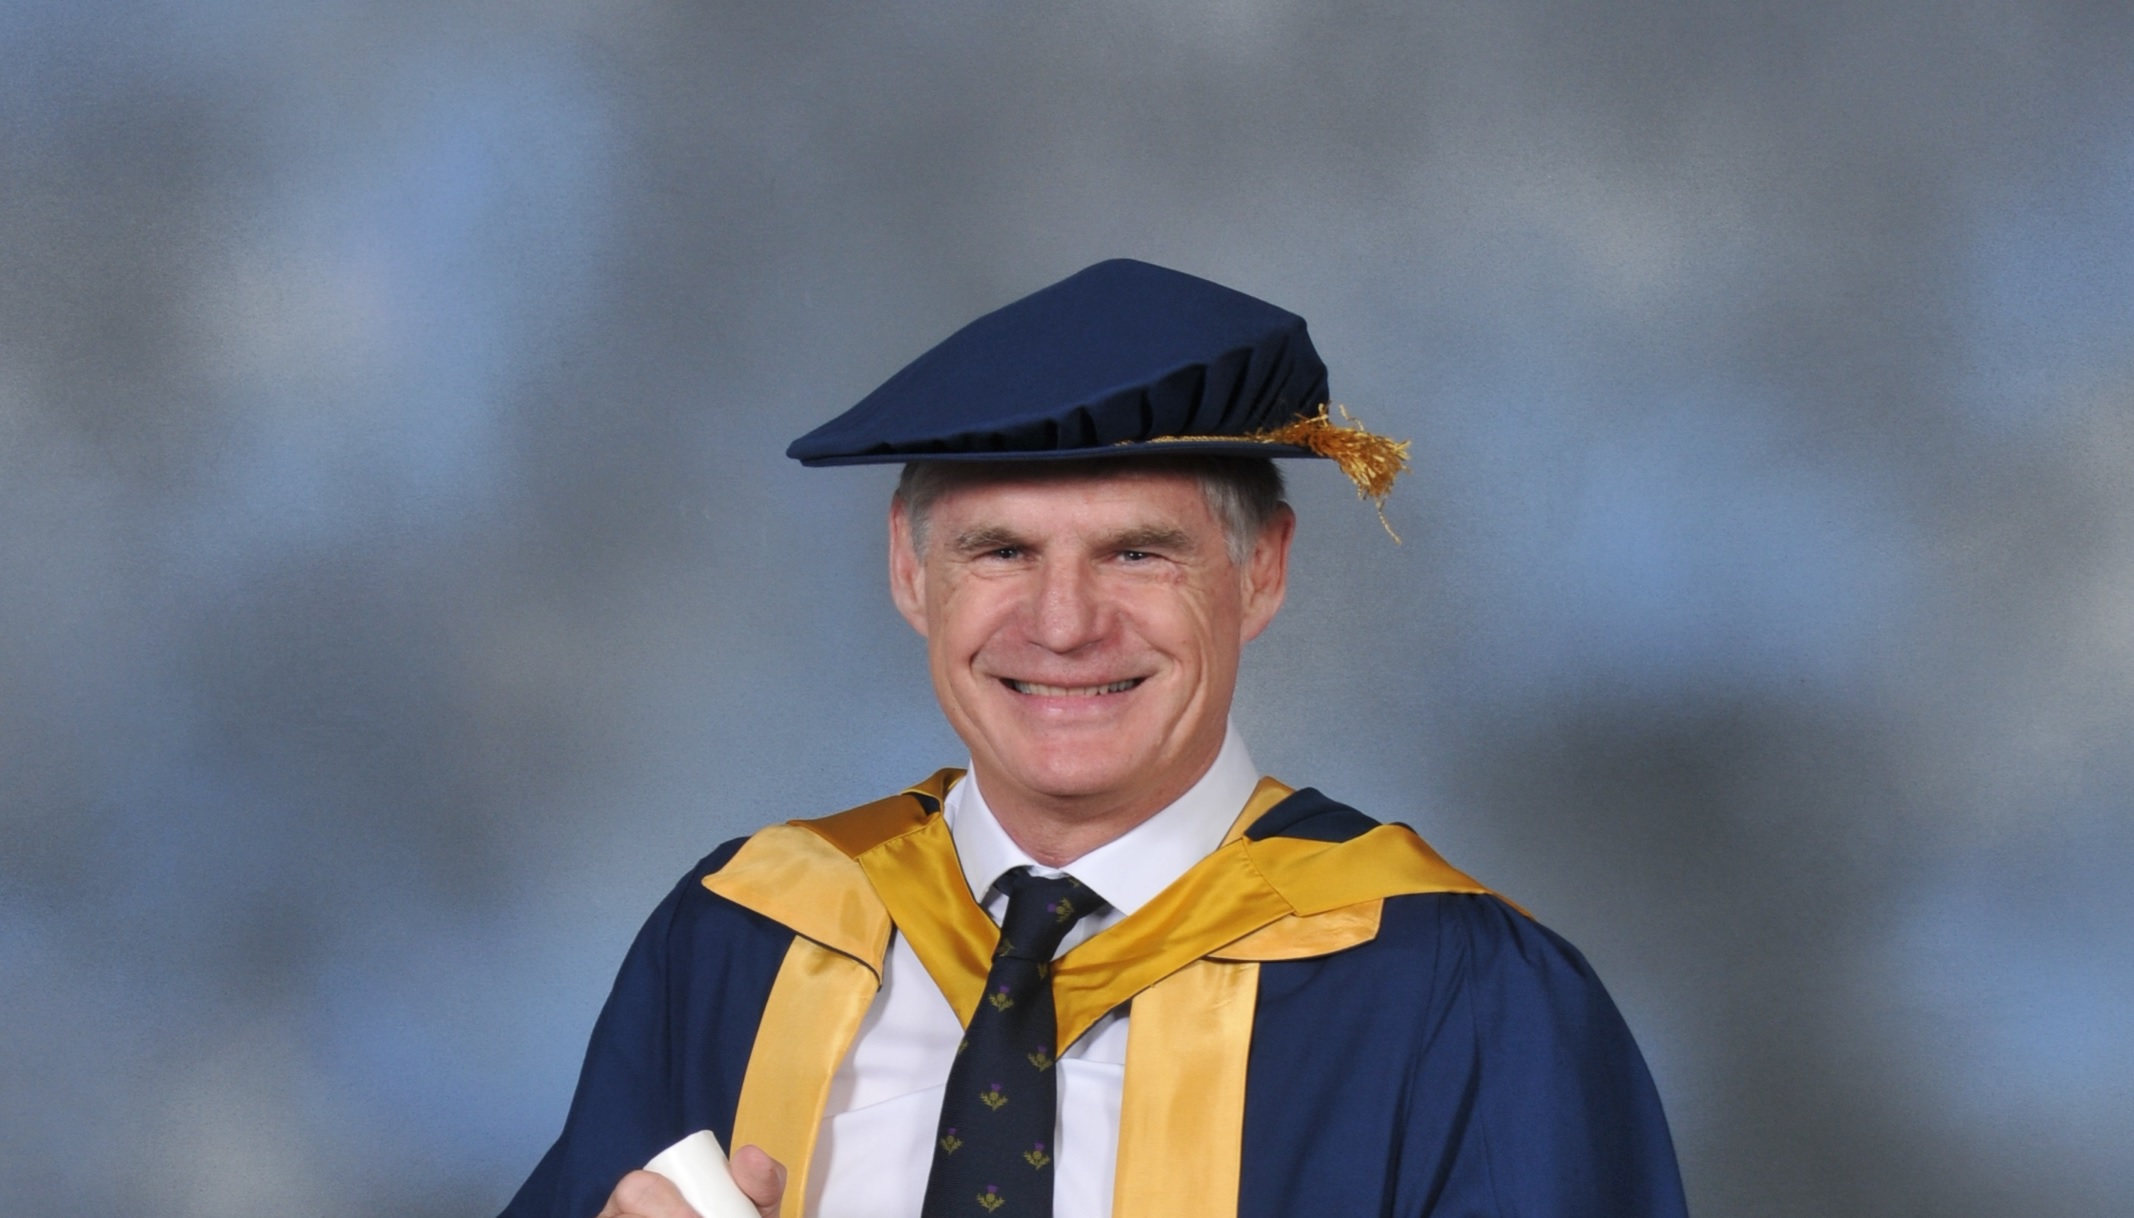 A photo of John Beattie in his graduation outfit